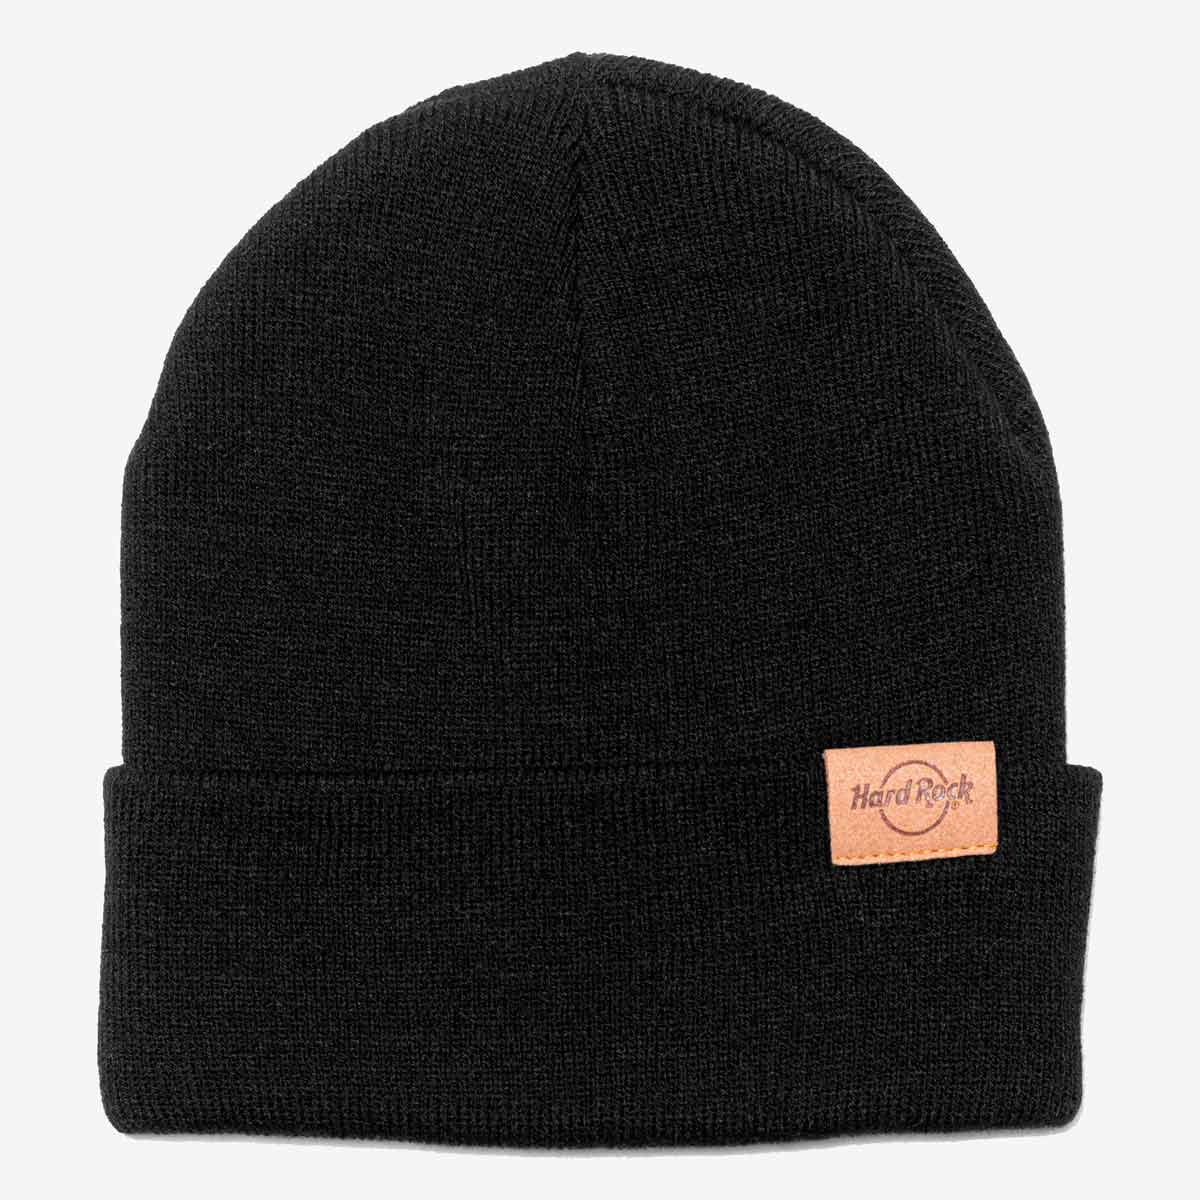 Cuffed Up Hard Rock Beanie in Black with Tan Logo image number 1